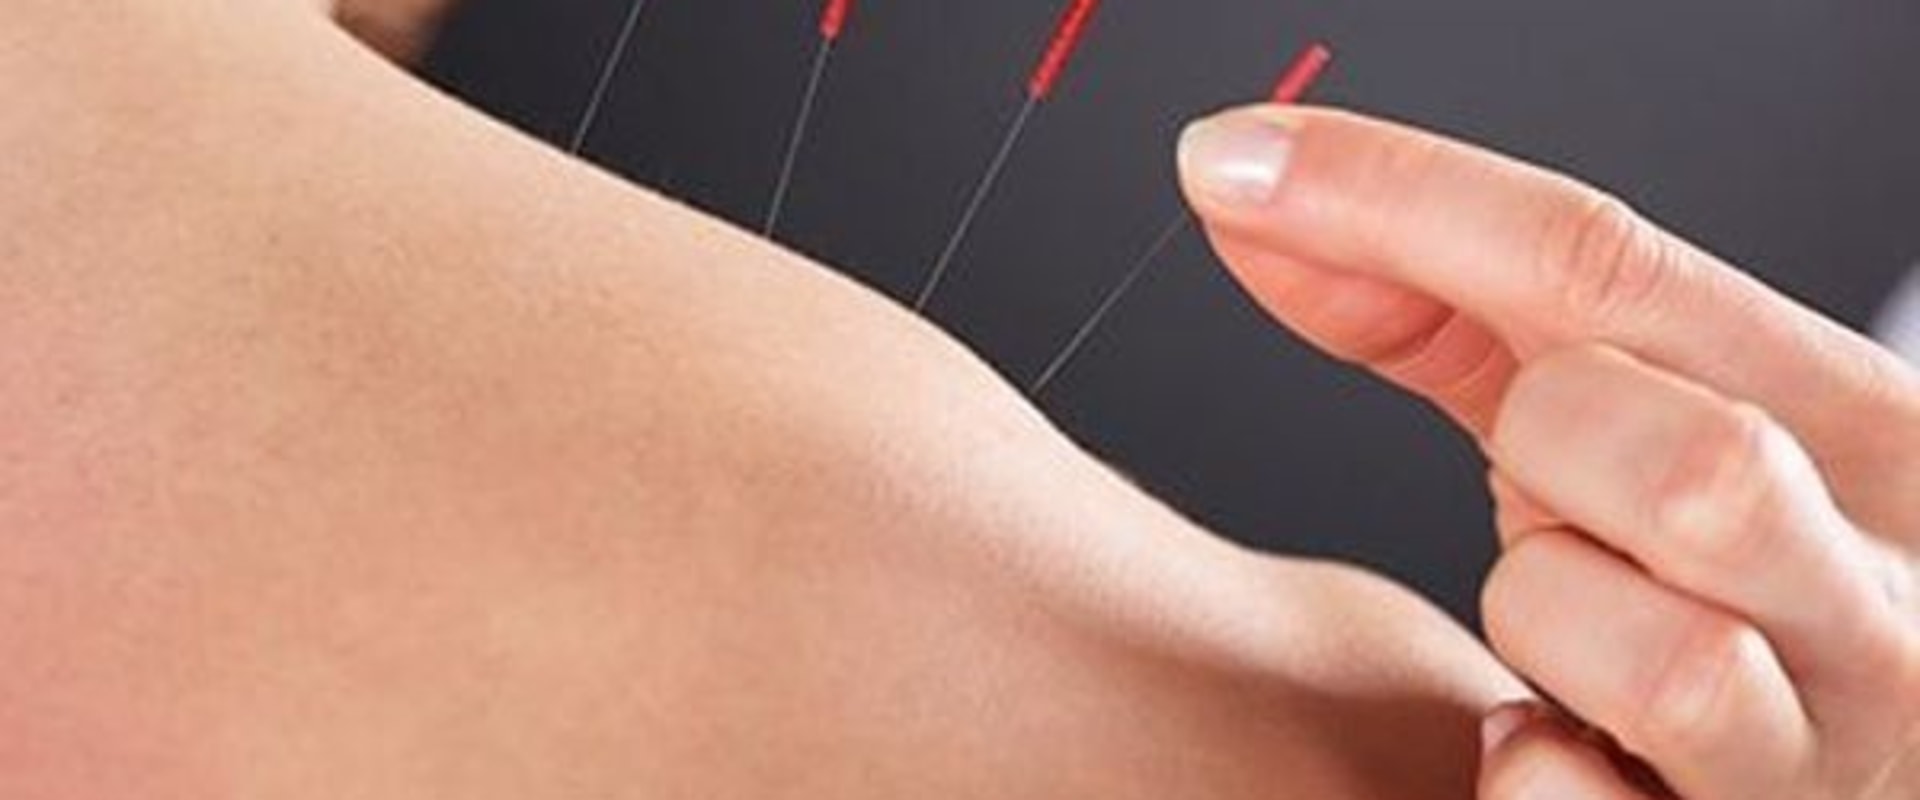 Can I Receive Acupuncture with a Pacemaker or Other Implanted Device?